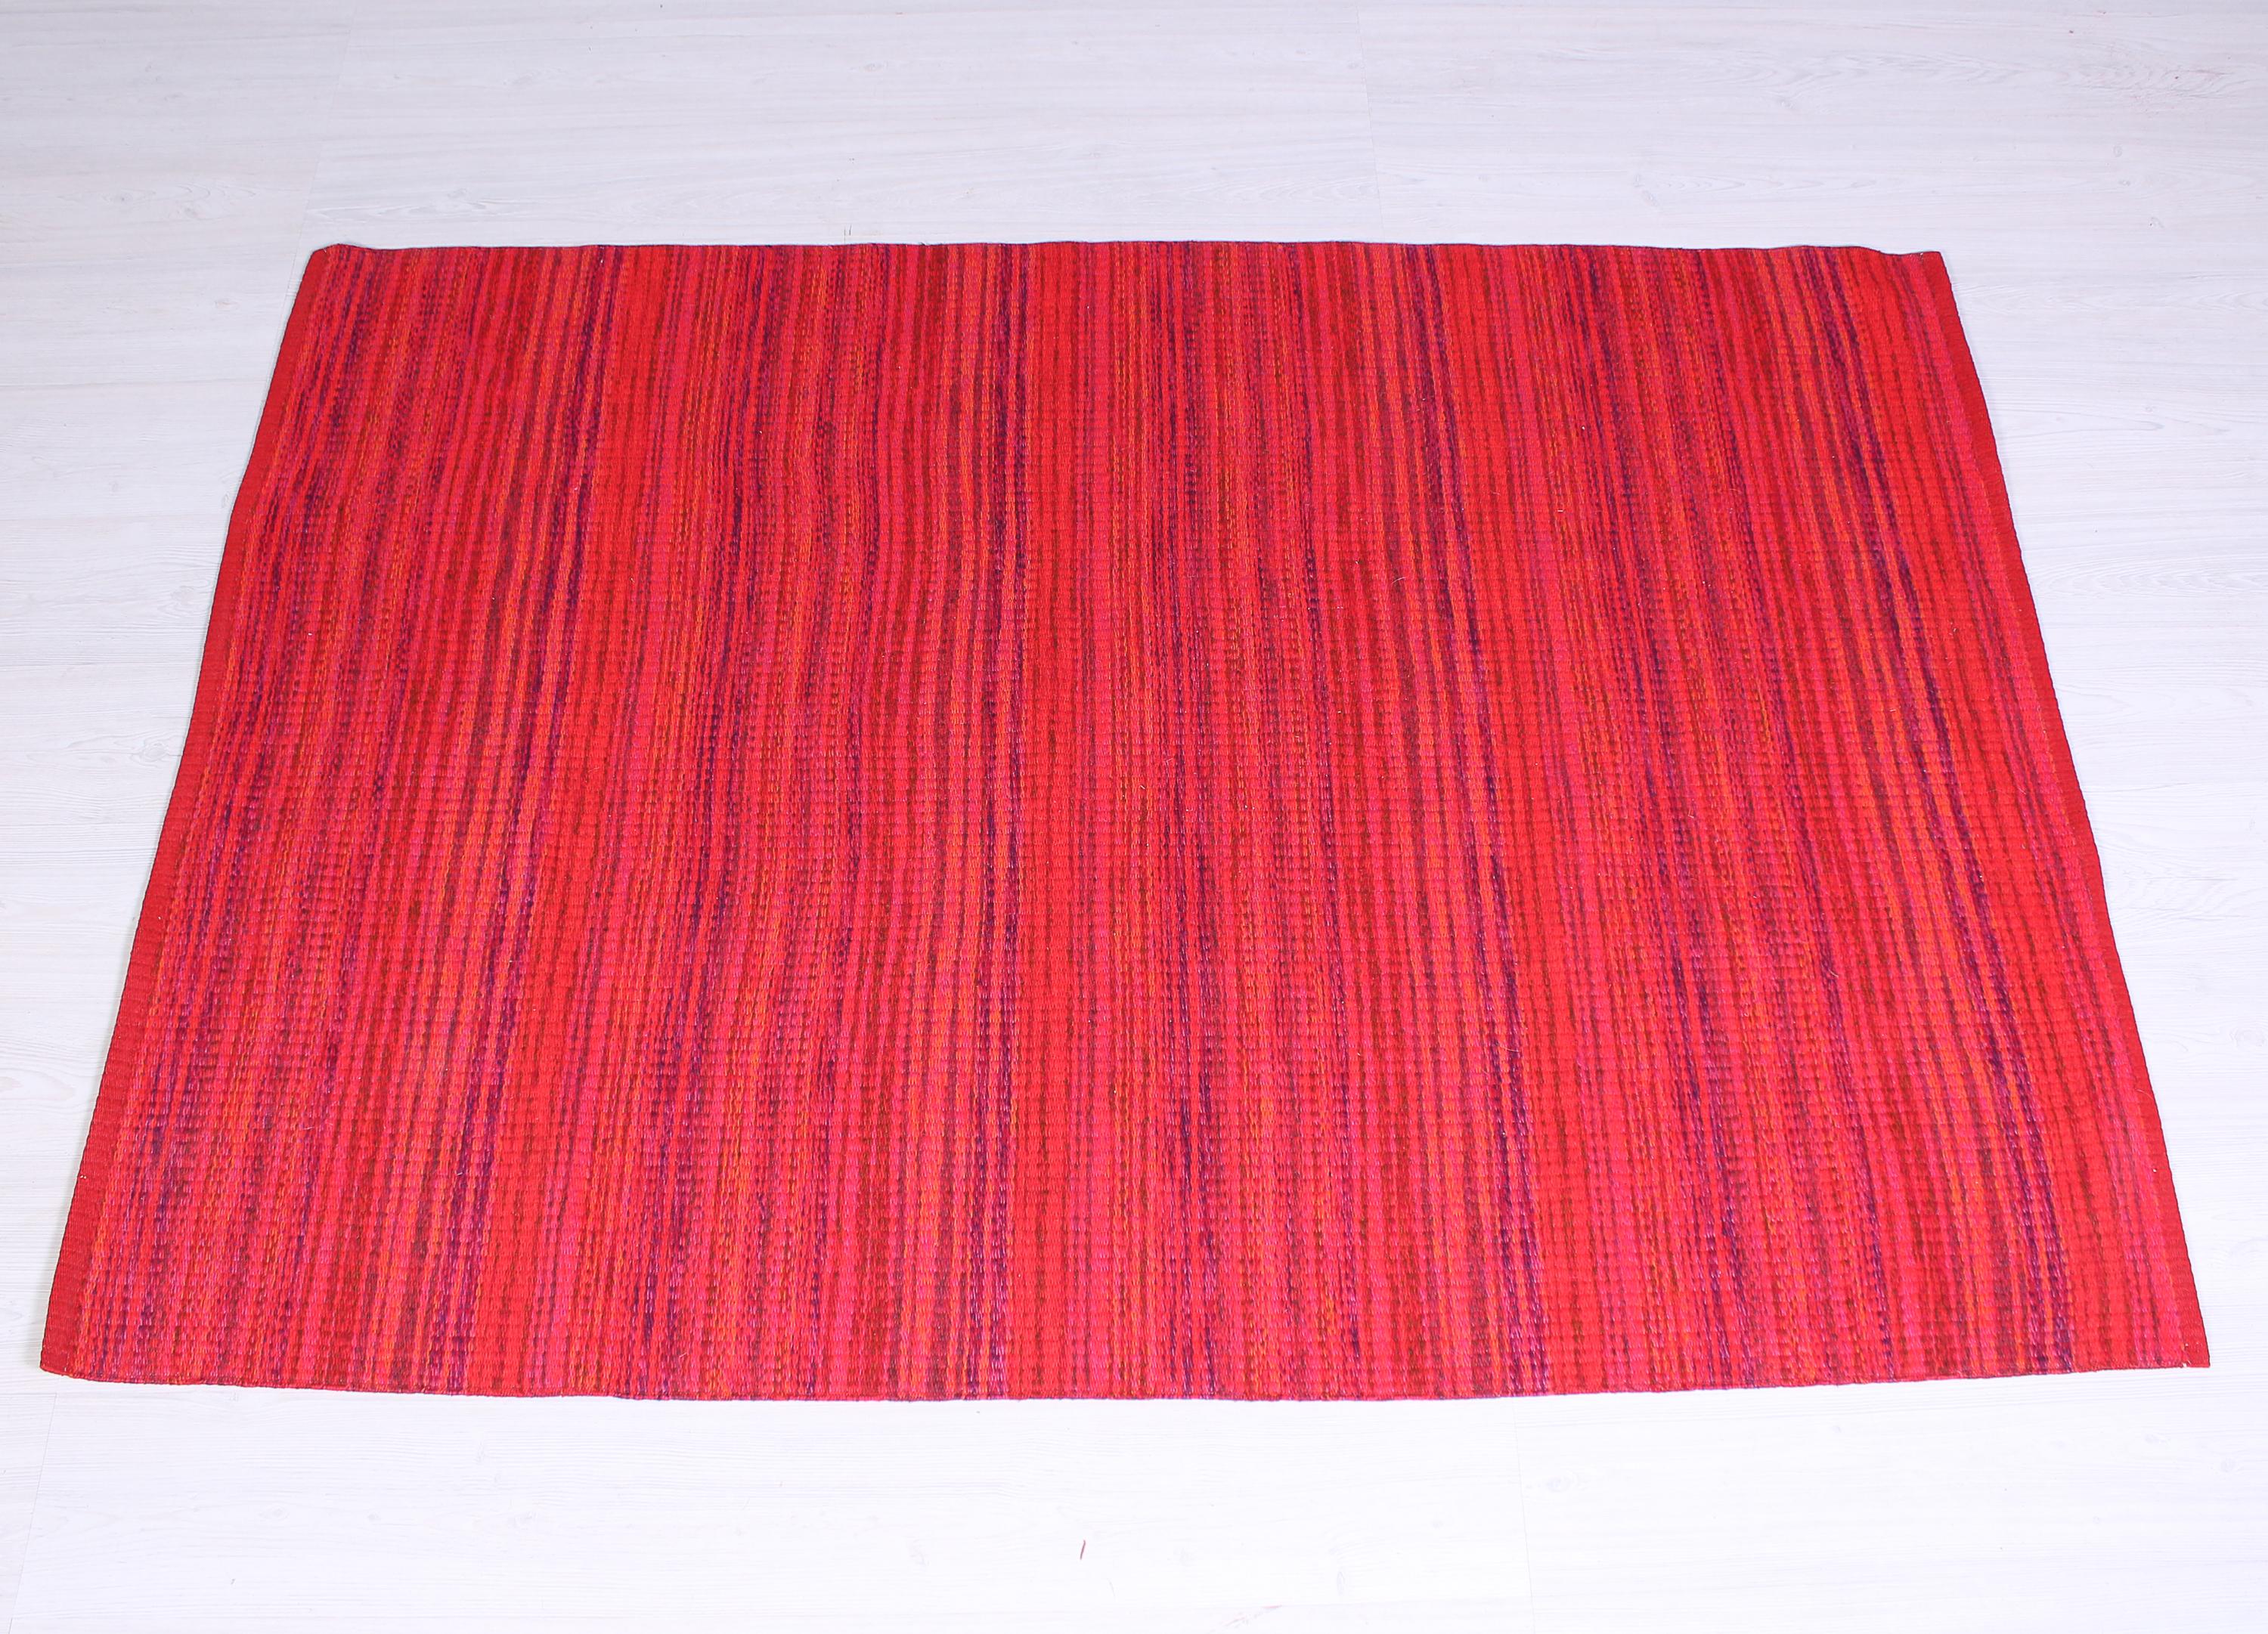 A vibrant red midcentury carpet made in Sweden during the 1960s. The carpet is made with double weave technique and is in very good vintage condition. Perfect piece to bring some color into the home.